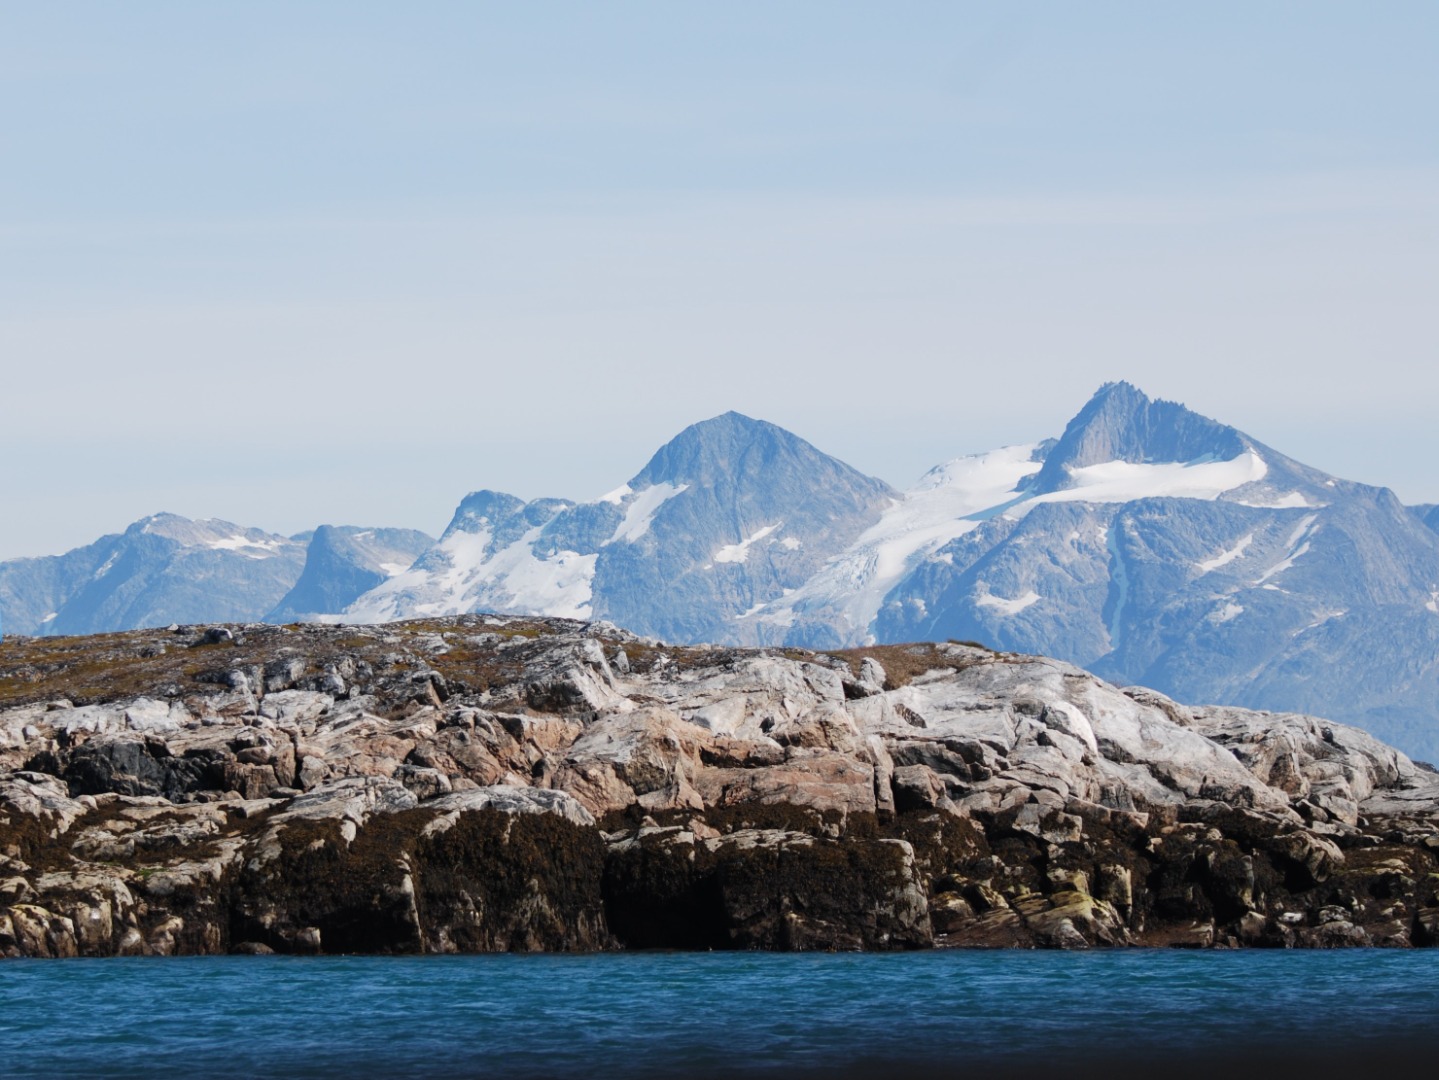 The inside channels of the west coast of Greenland, protected from the Davis Strait / Labrador Sea by a chain of offshore islands. Photograph taken looking towards the Greenland ice cap while cruising in high latitudes on the yacht Santana, with Merfyn Owen and Ashley Perrin in 2019.